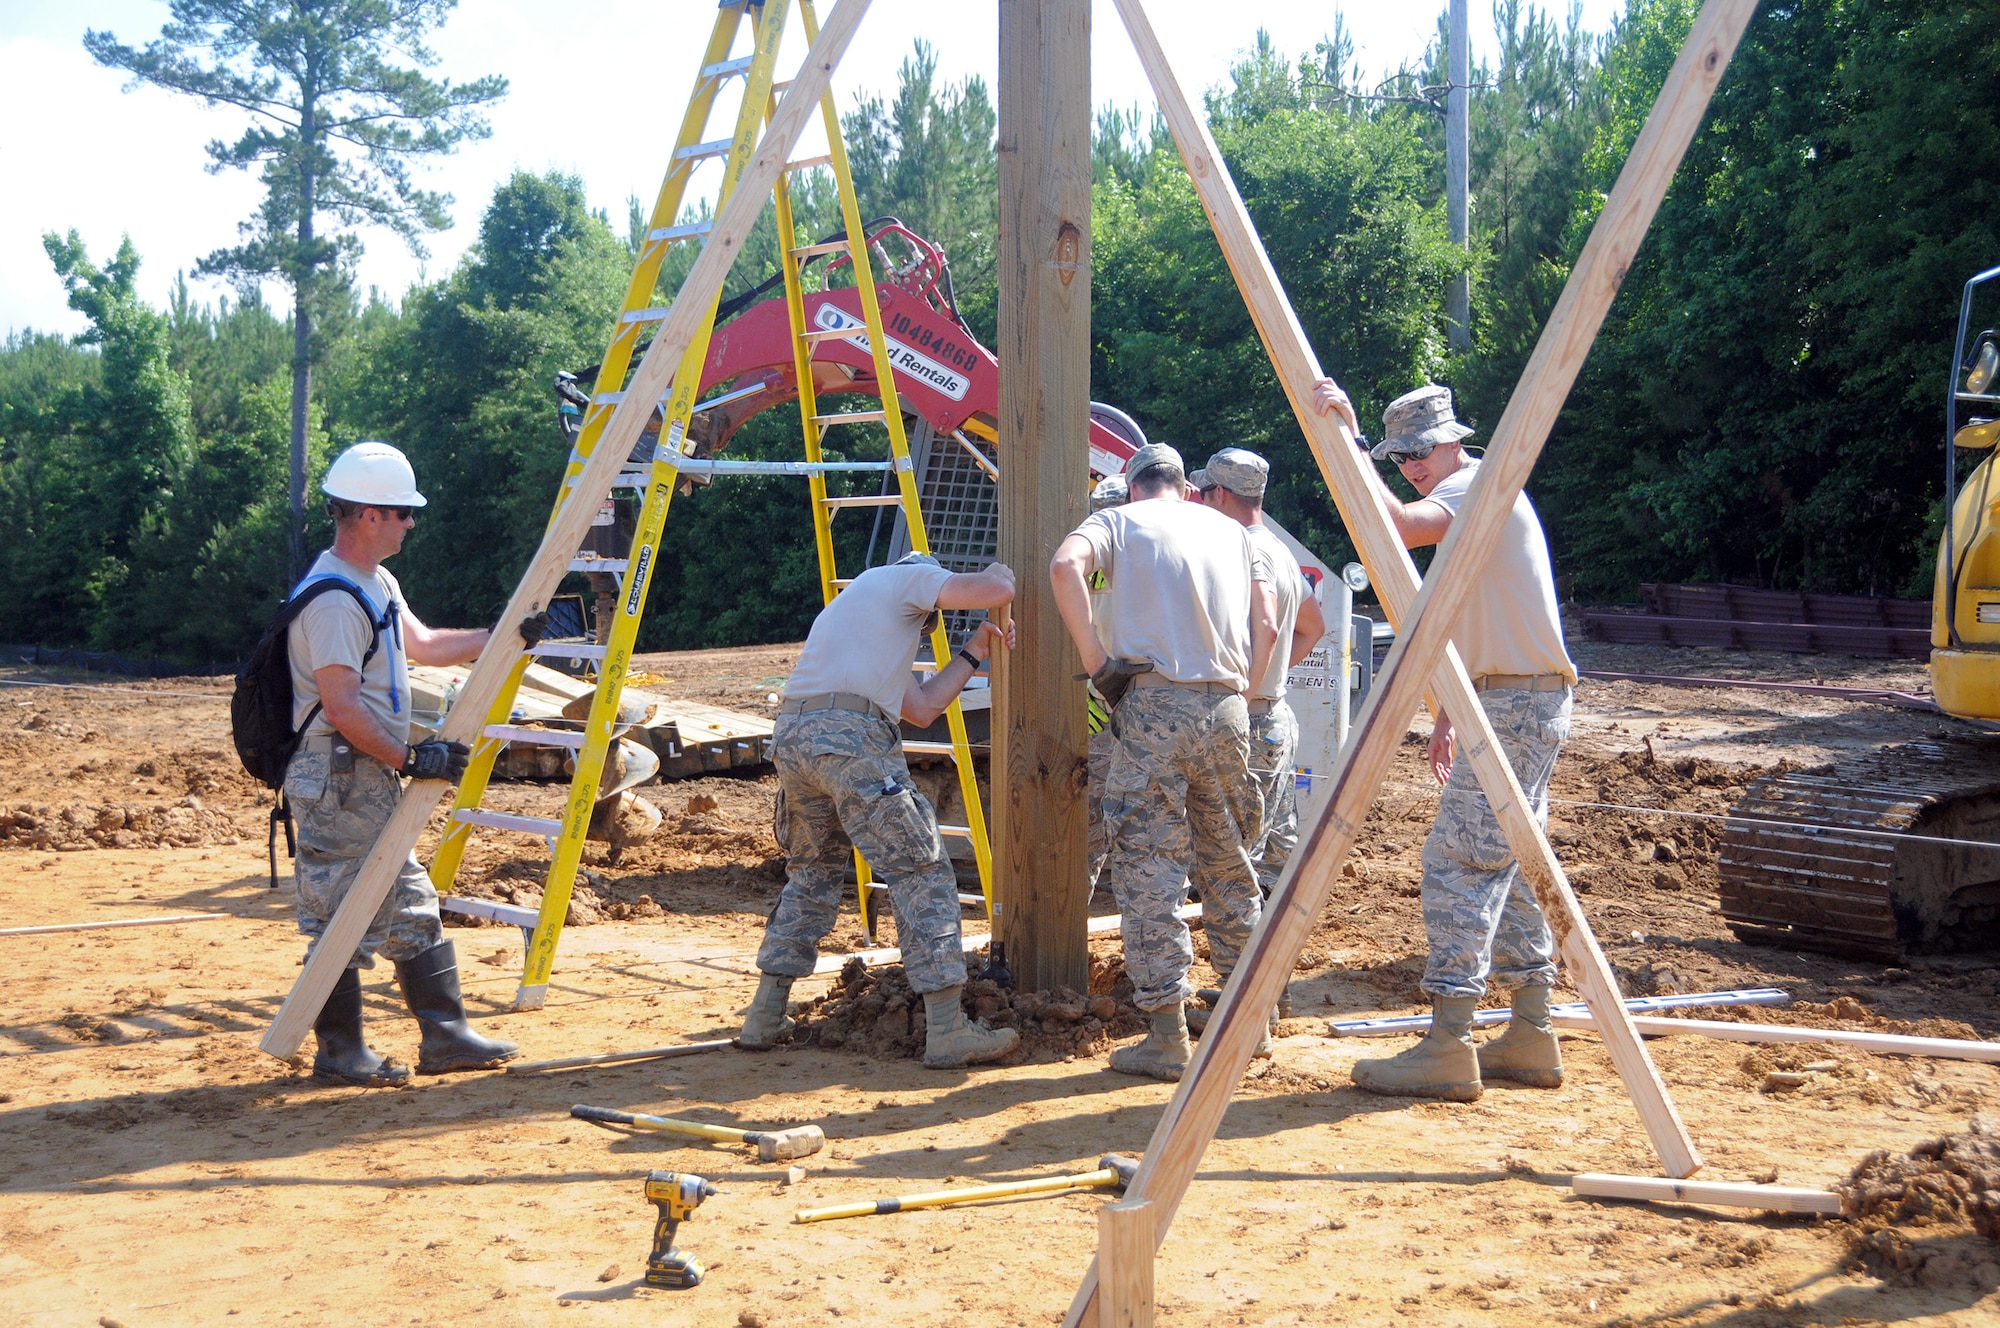 Staff Sgt. Brian Wood, 445th Civil Engineer Squadron structural journeyman (far left) and members of the Air National Guard’s 189th CES from Little Rock Air Force Base, Arkansas, place a beam for a pole barn at Camp Kamasa, Crystal Springs, Mississippi, June 6, 2018.